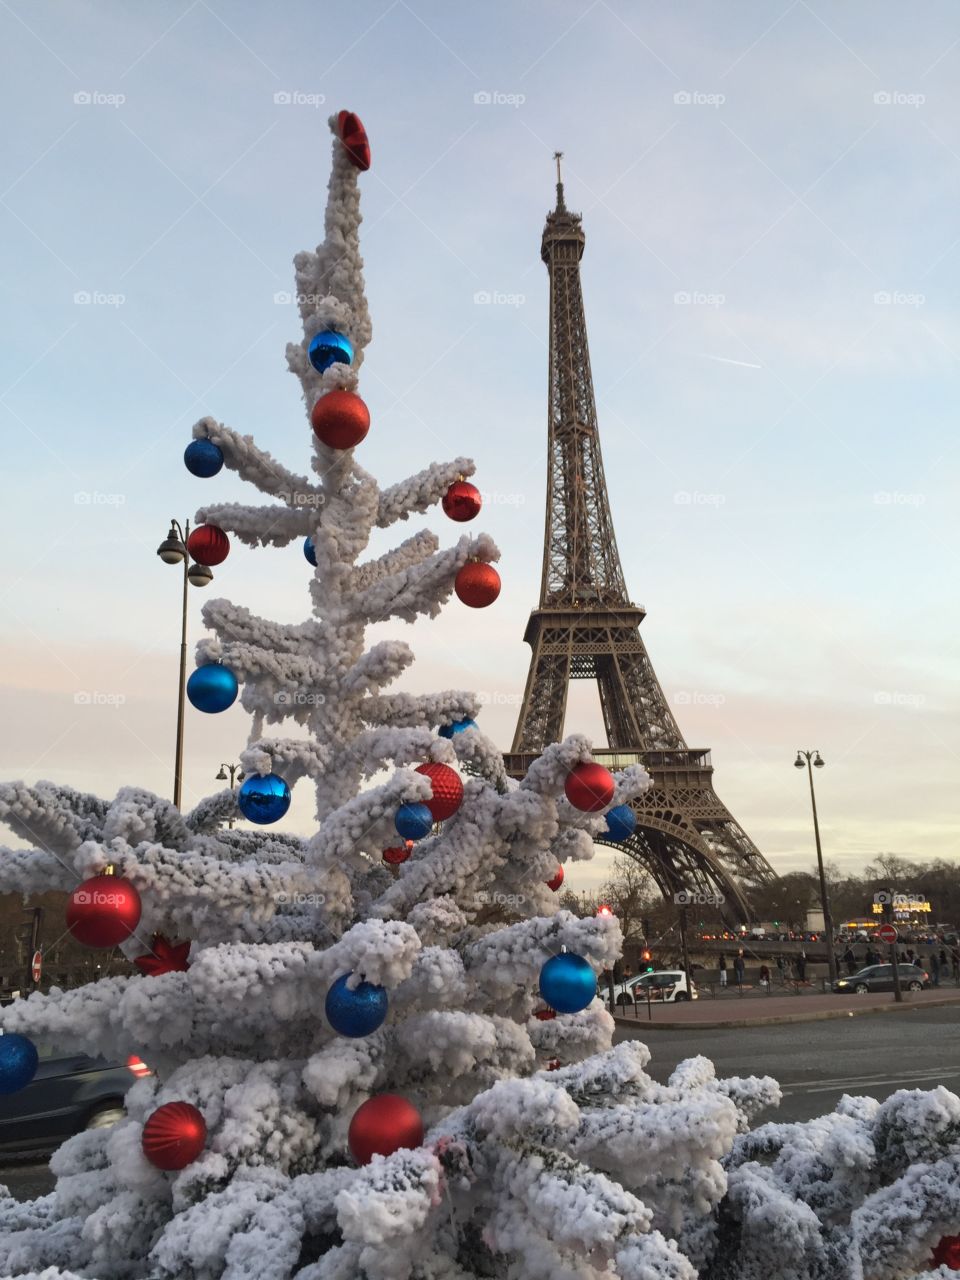 Torre eiffel and the christmans tree